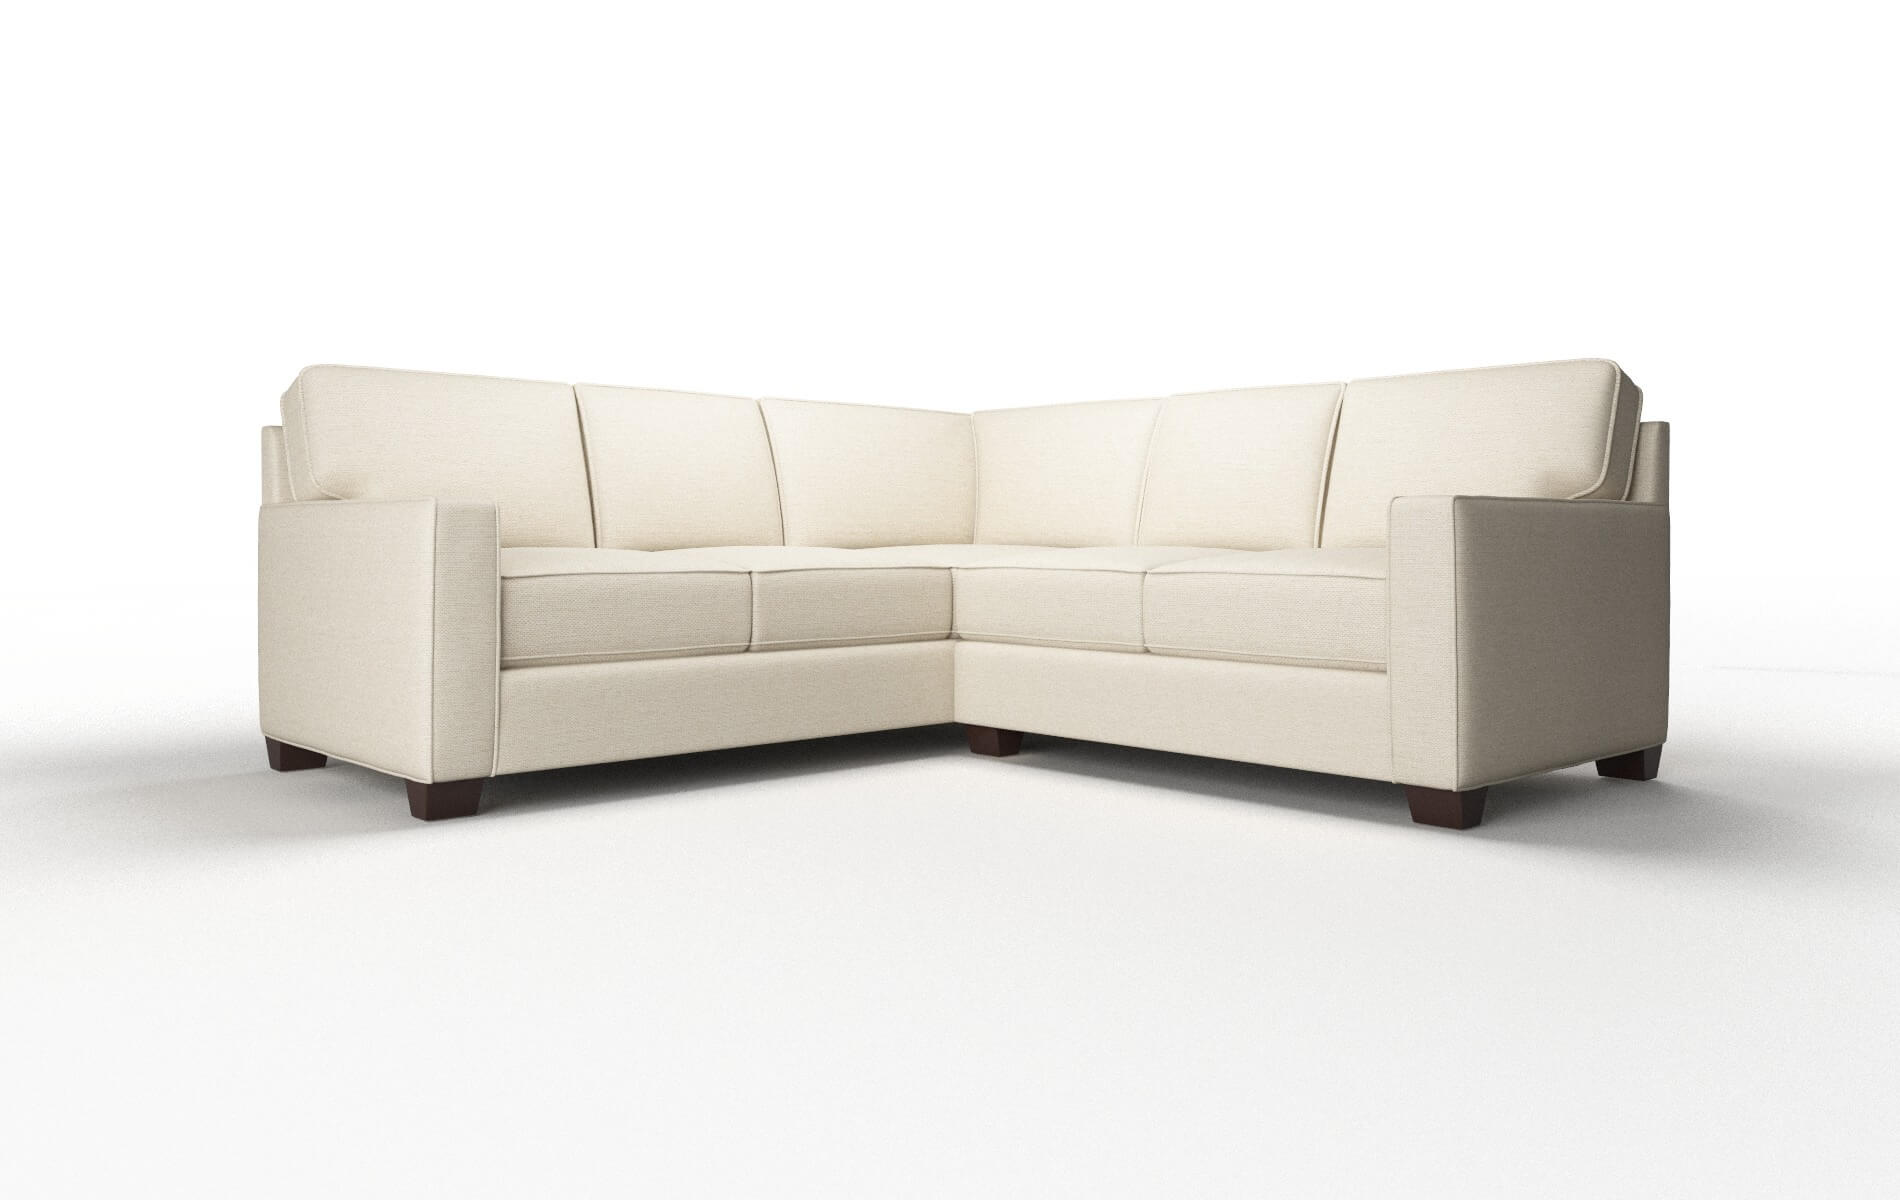 Chicago Chance Sand Sectional espresso legs 1